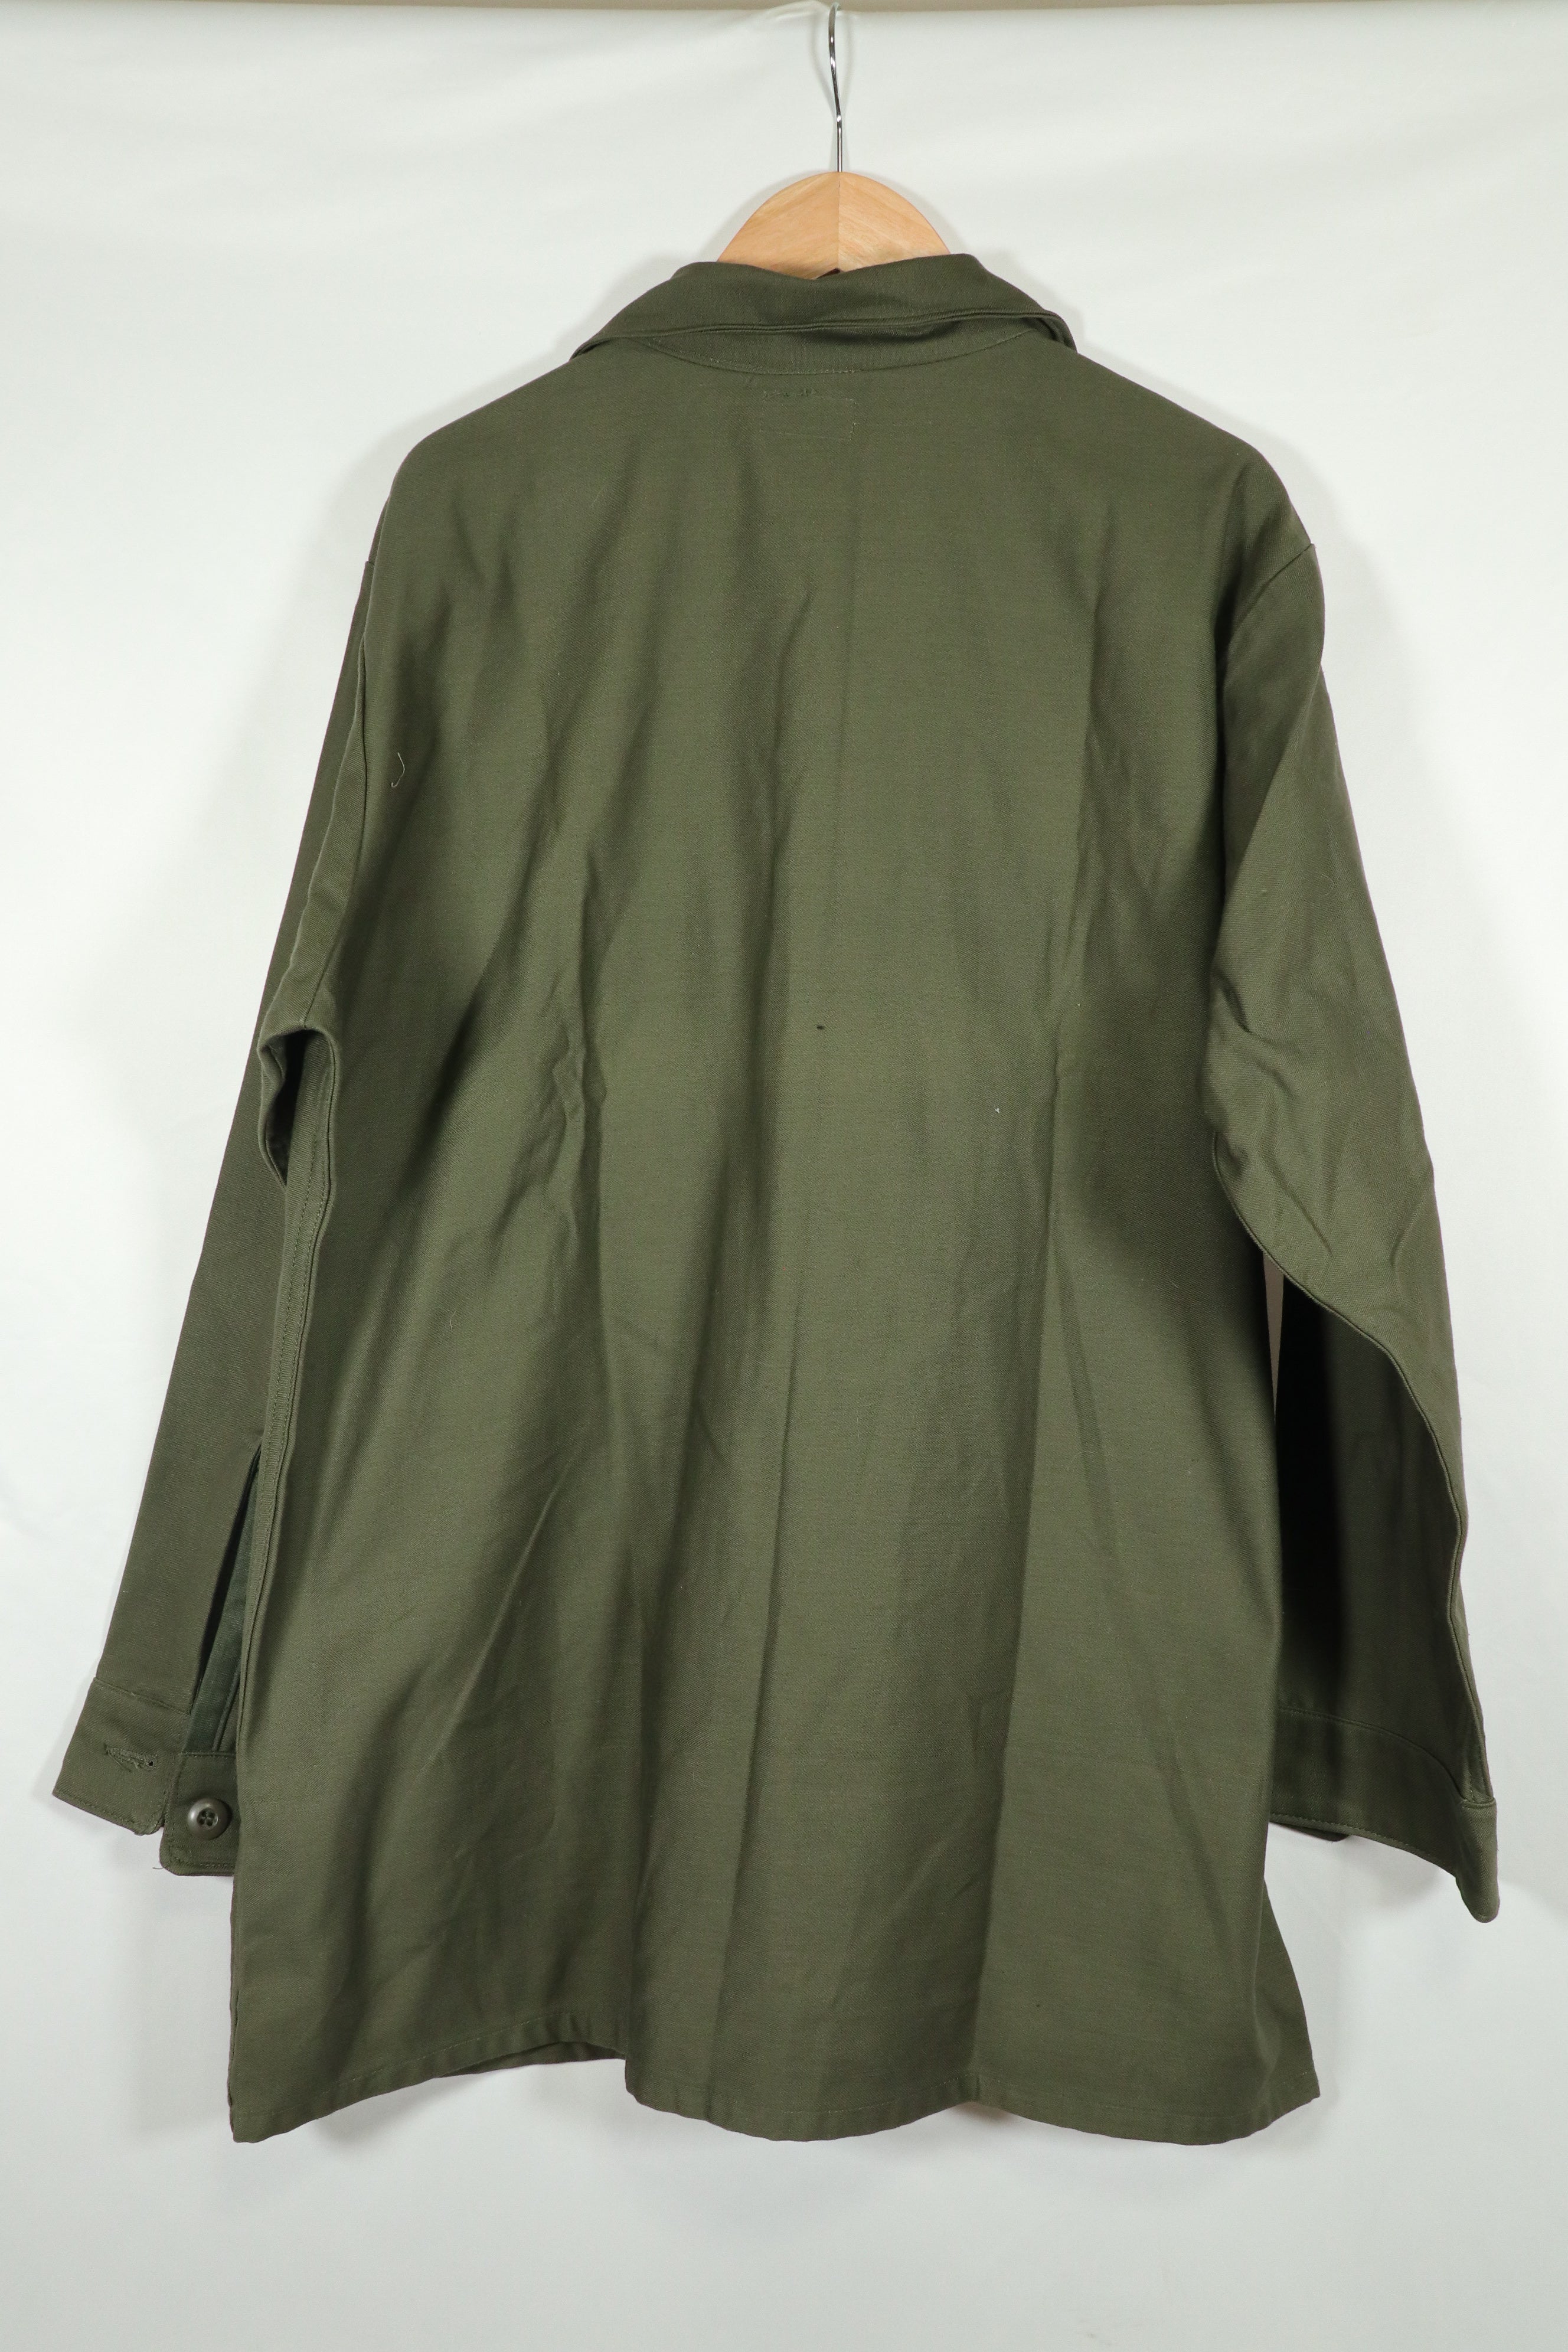 Actual 1974 OG-107 utility shirt, deadstock, 161/2 32, large size.